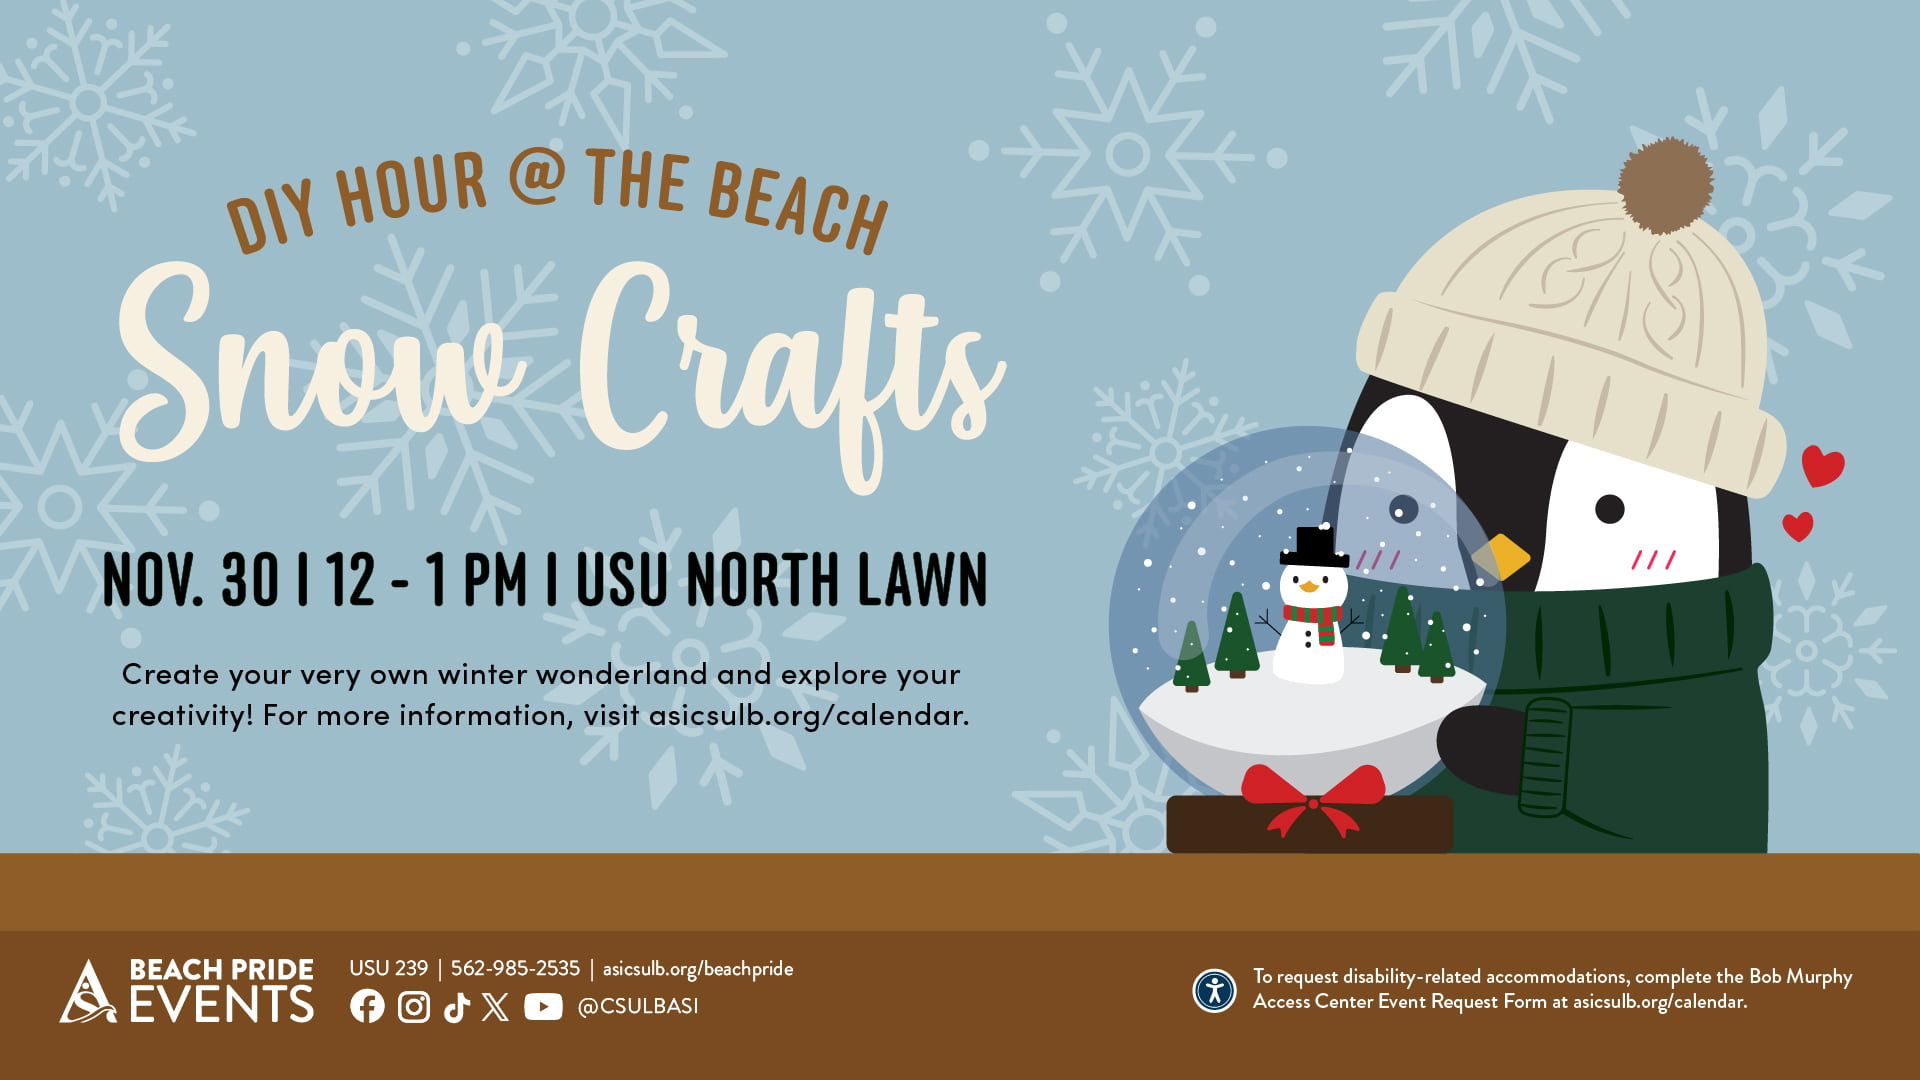 DIY Hour at the Beach Snow Crafts